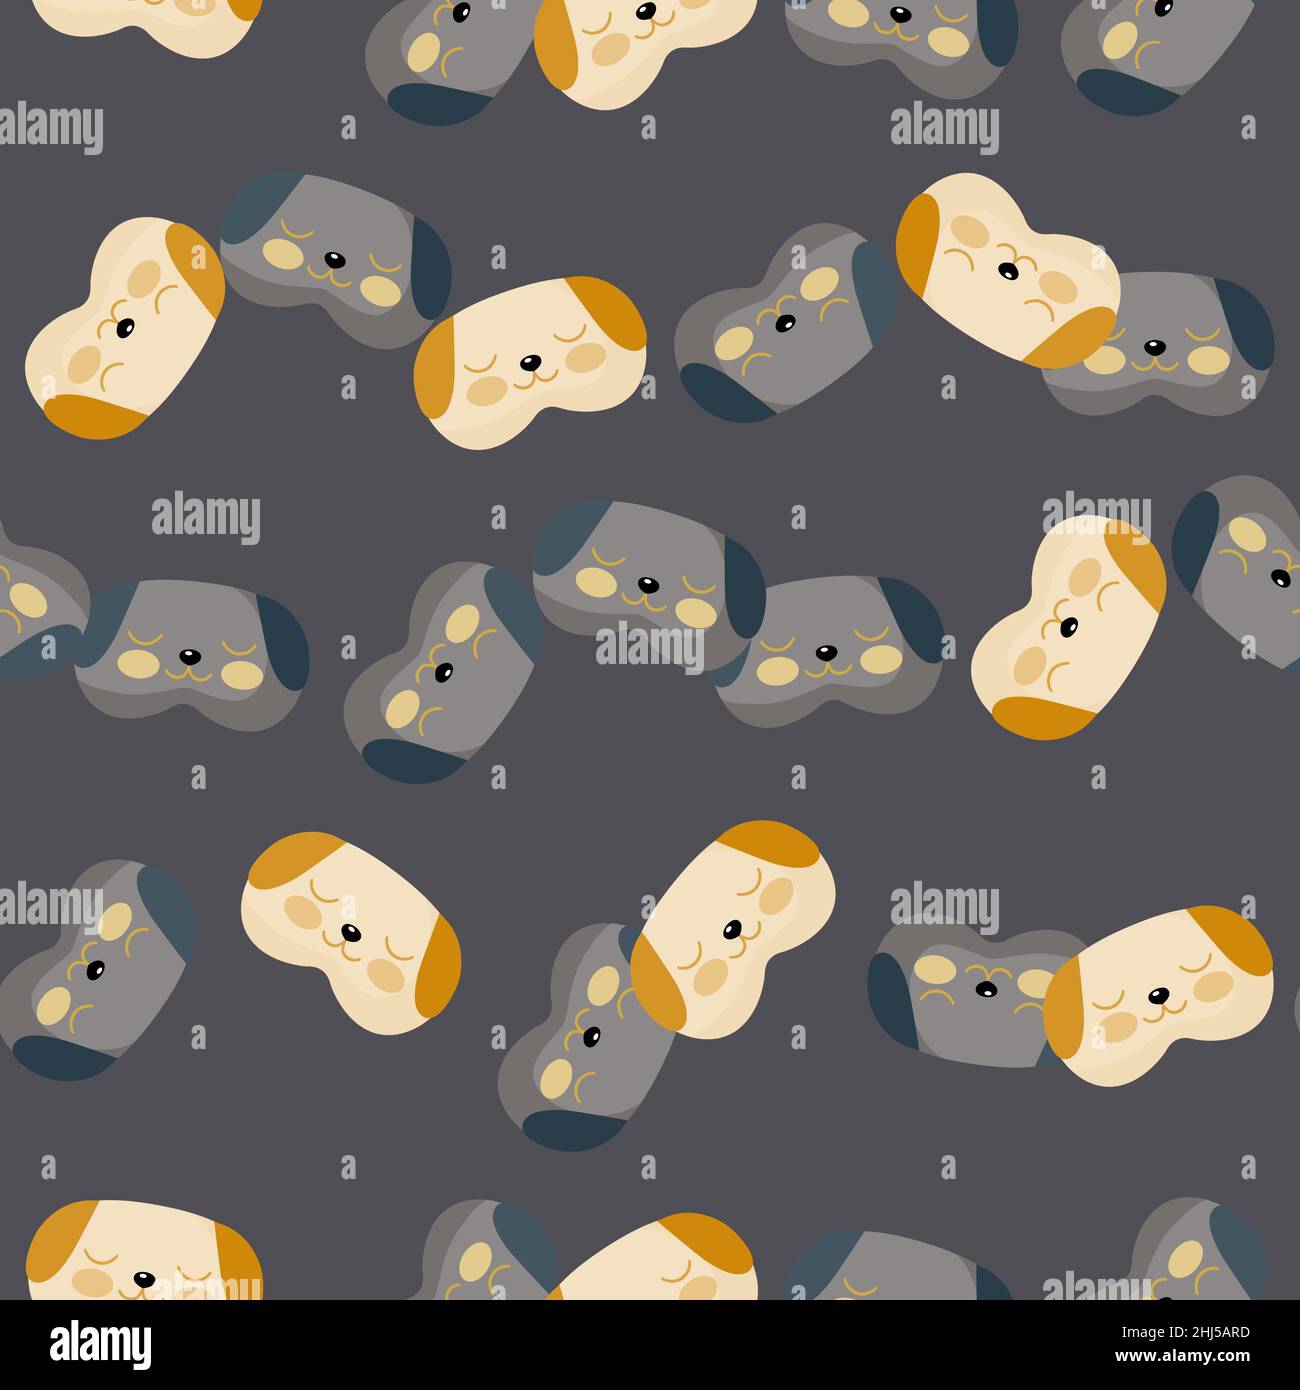 Dog mask yellow and gray color chaotic seamless pattern on dark gray background. Children graphic design element for different purposes. Flat vector i Stock Vector